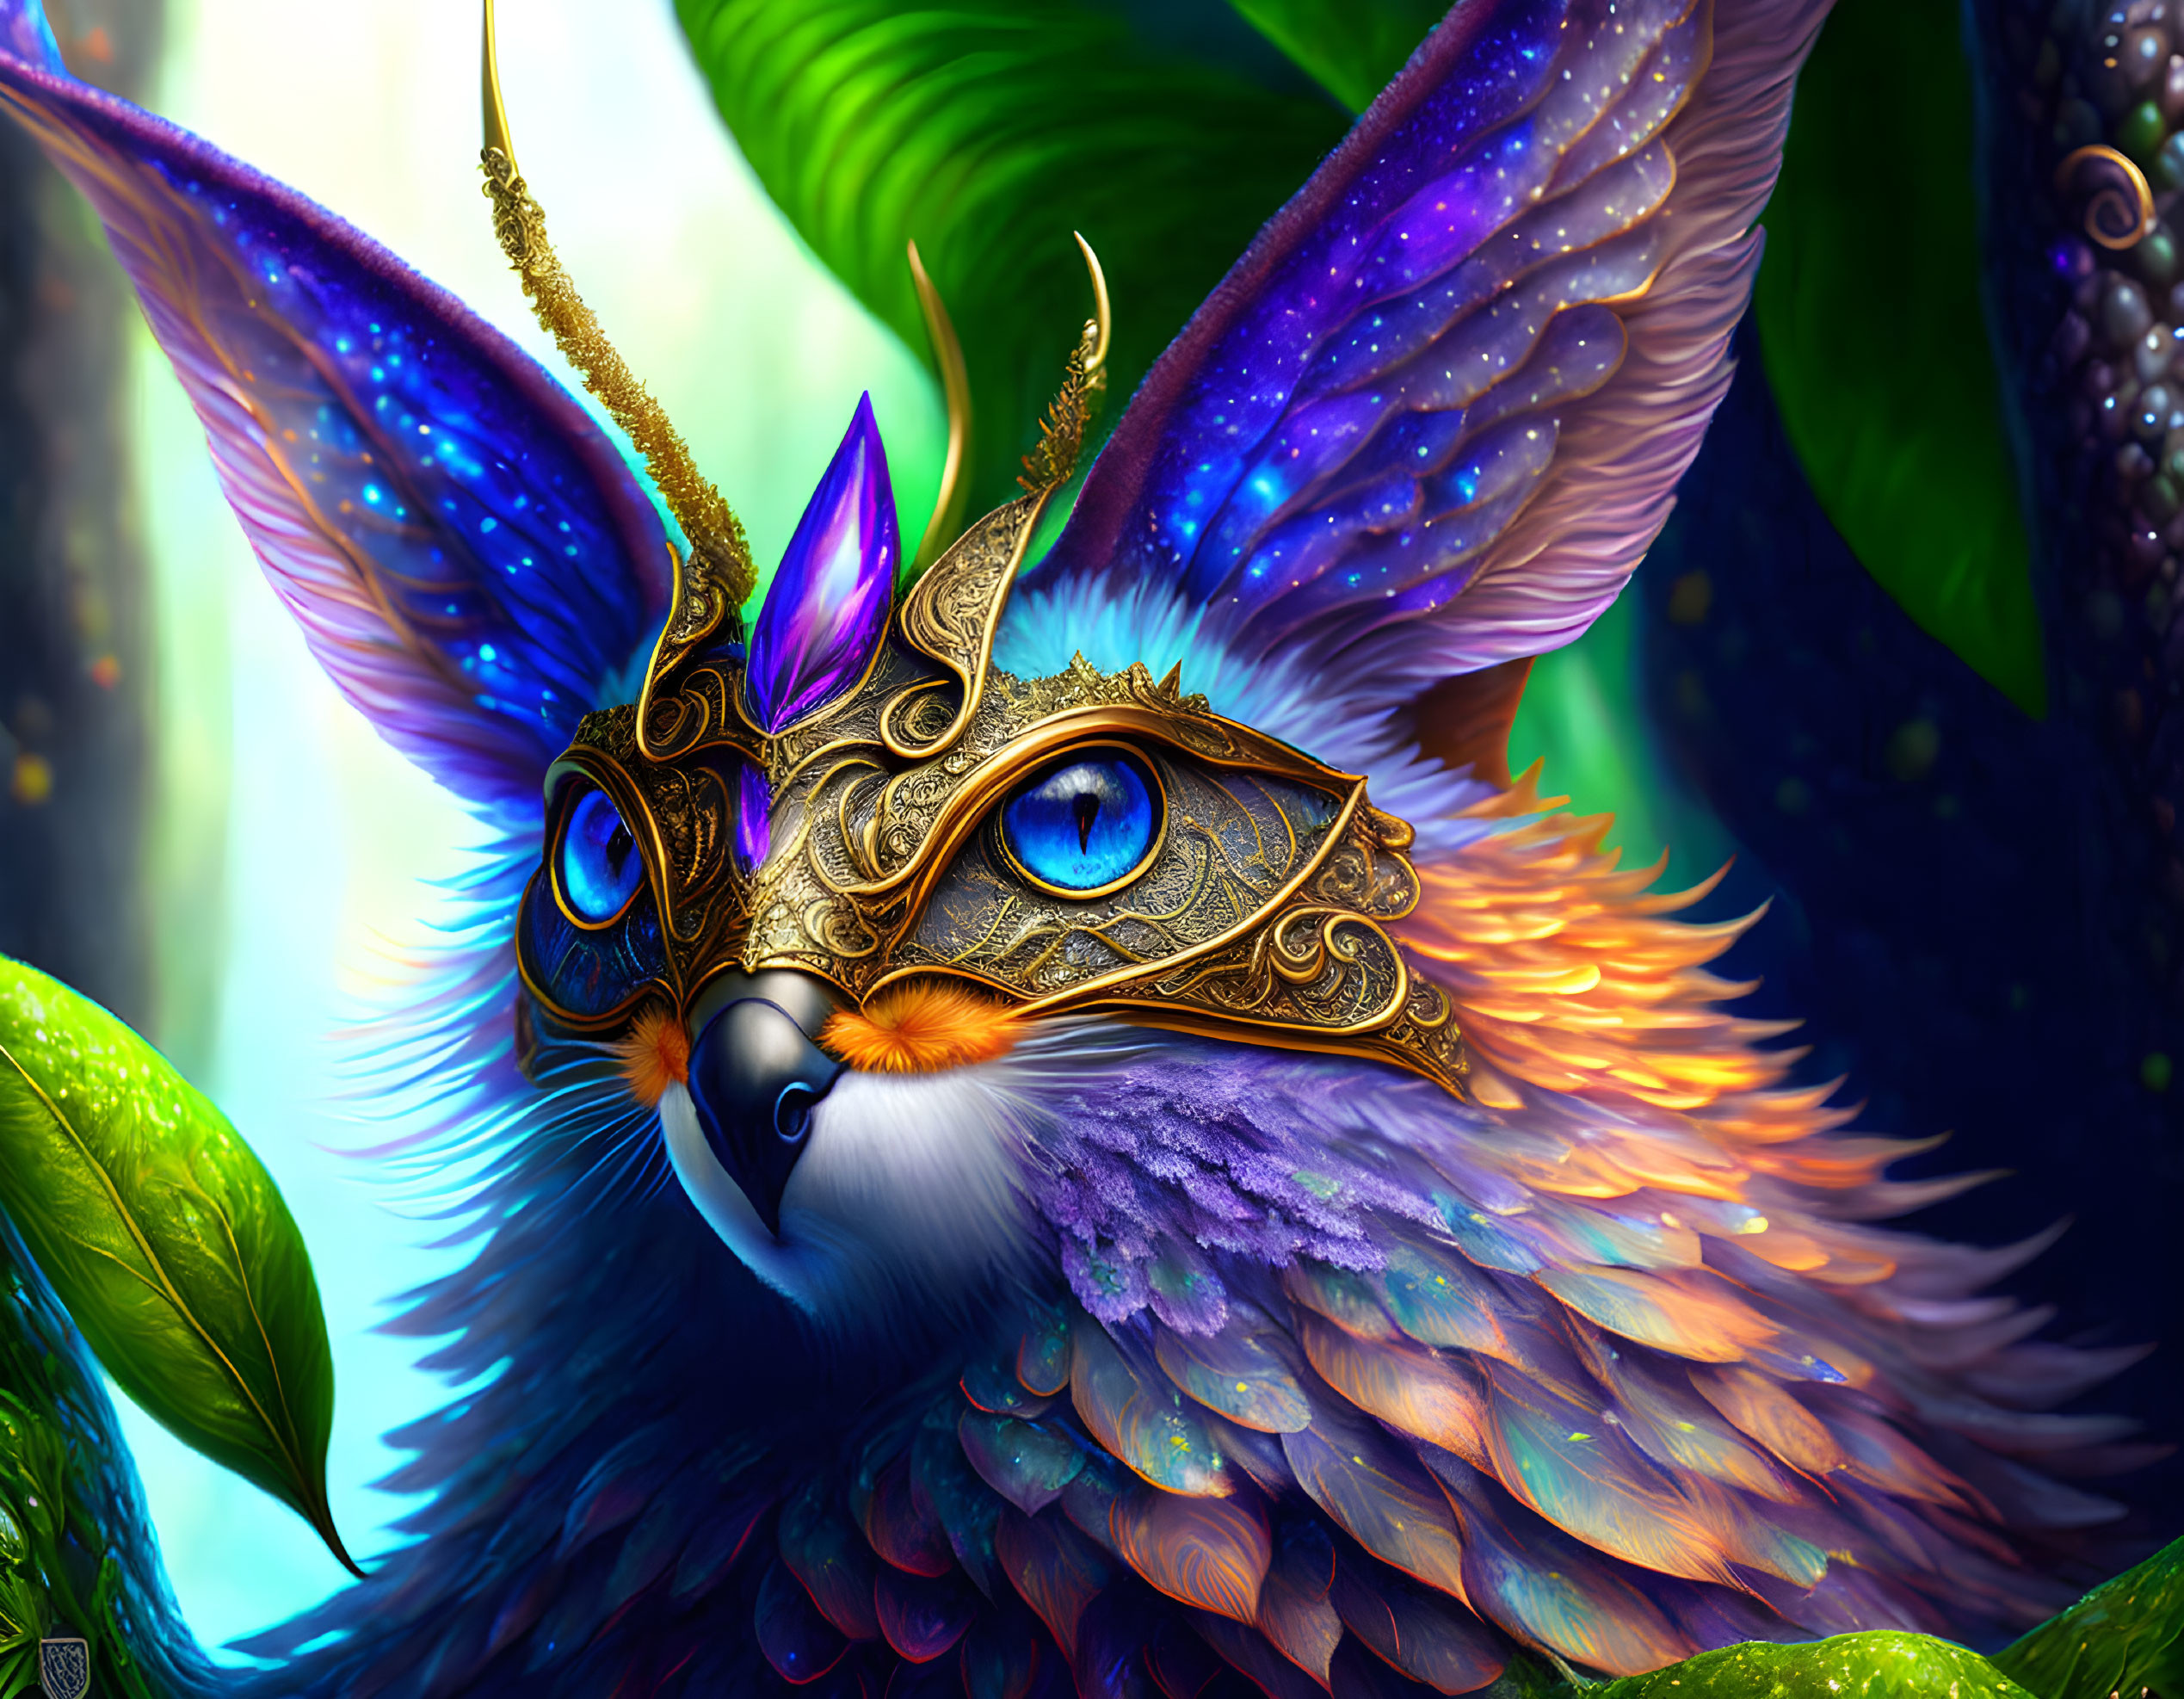 Colorful fantasy bird creature with mask in purple and blue on green background